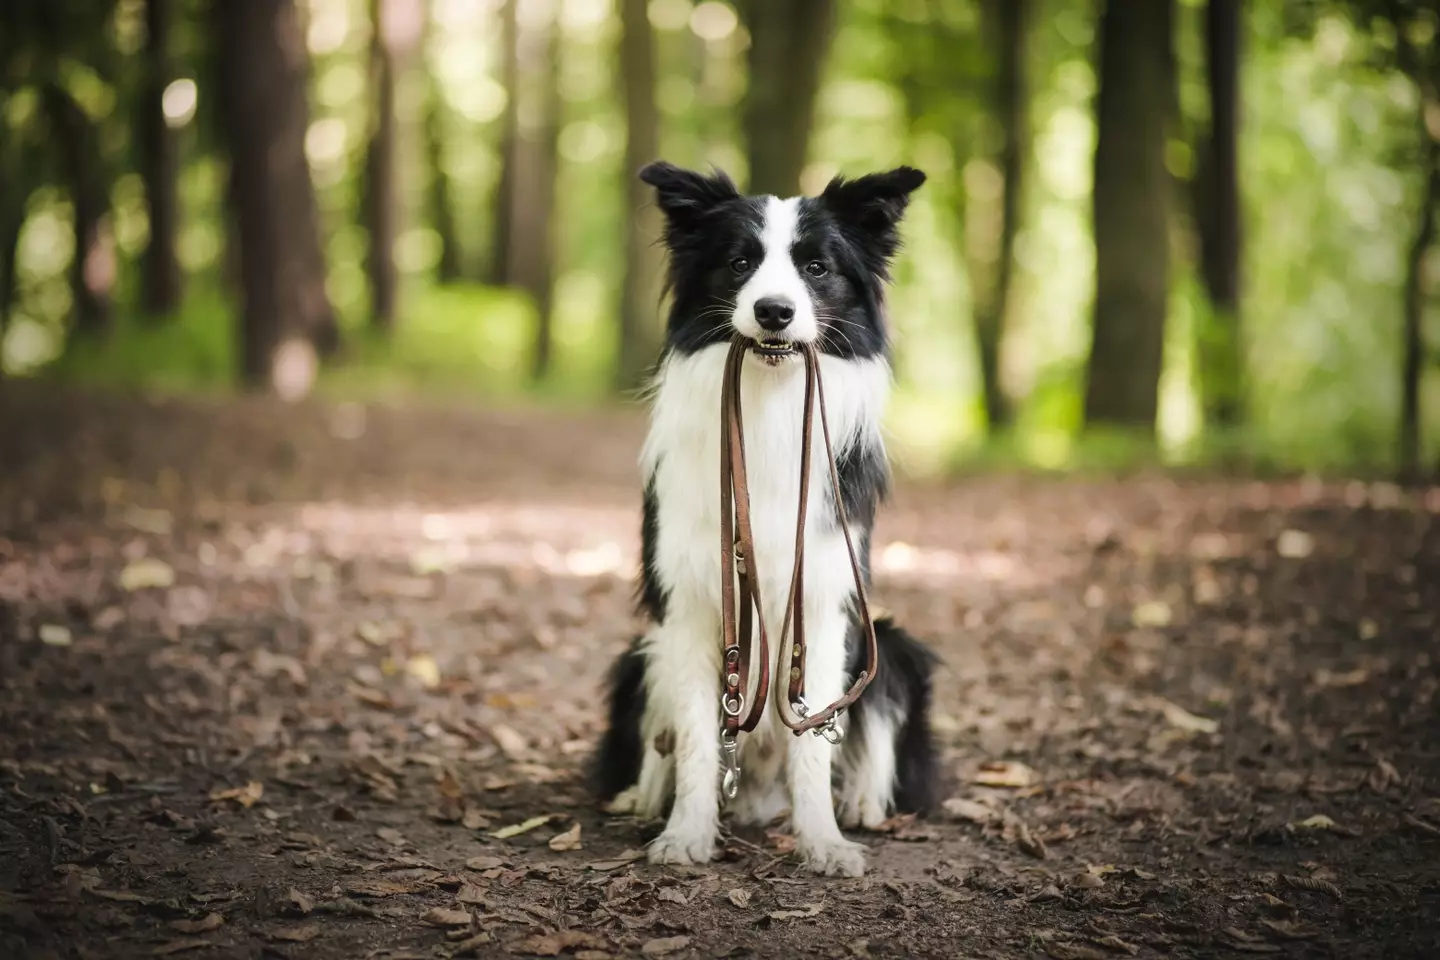 If your dog wanders off into a prohibited area, you could be landed with a hefty fine (